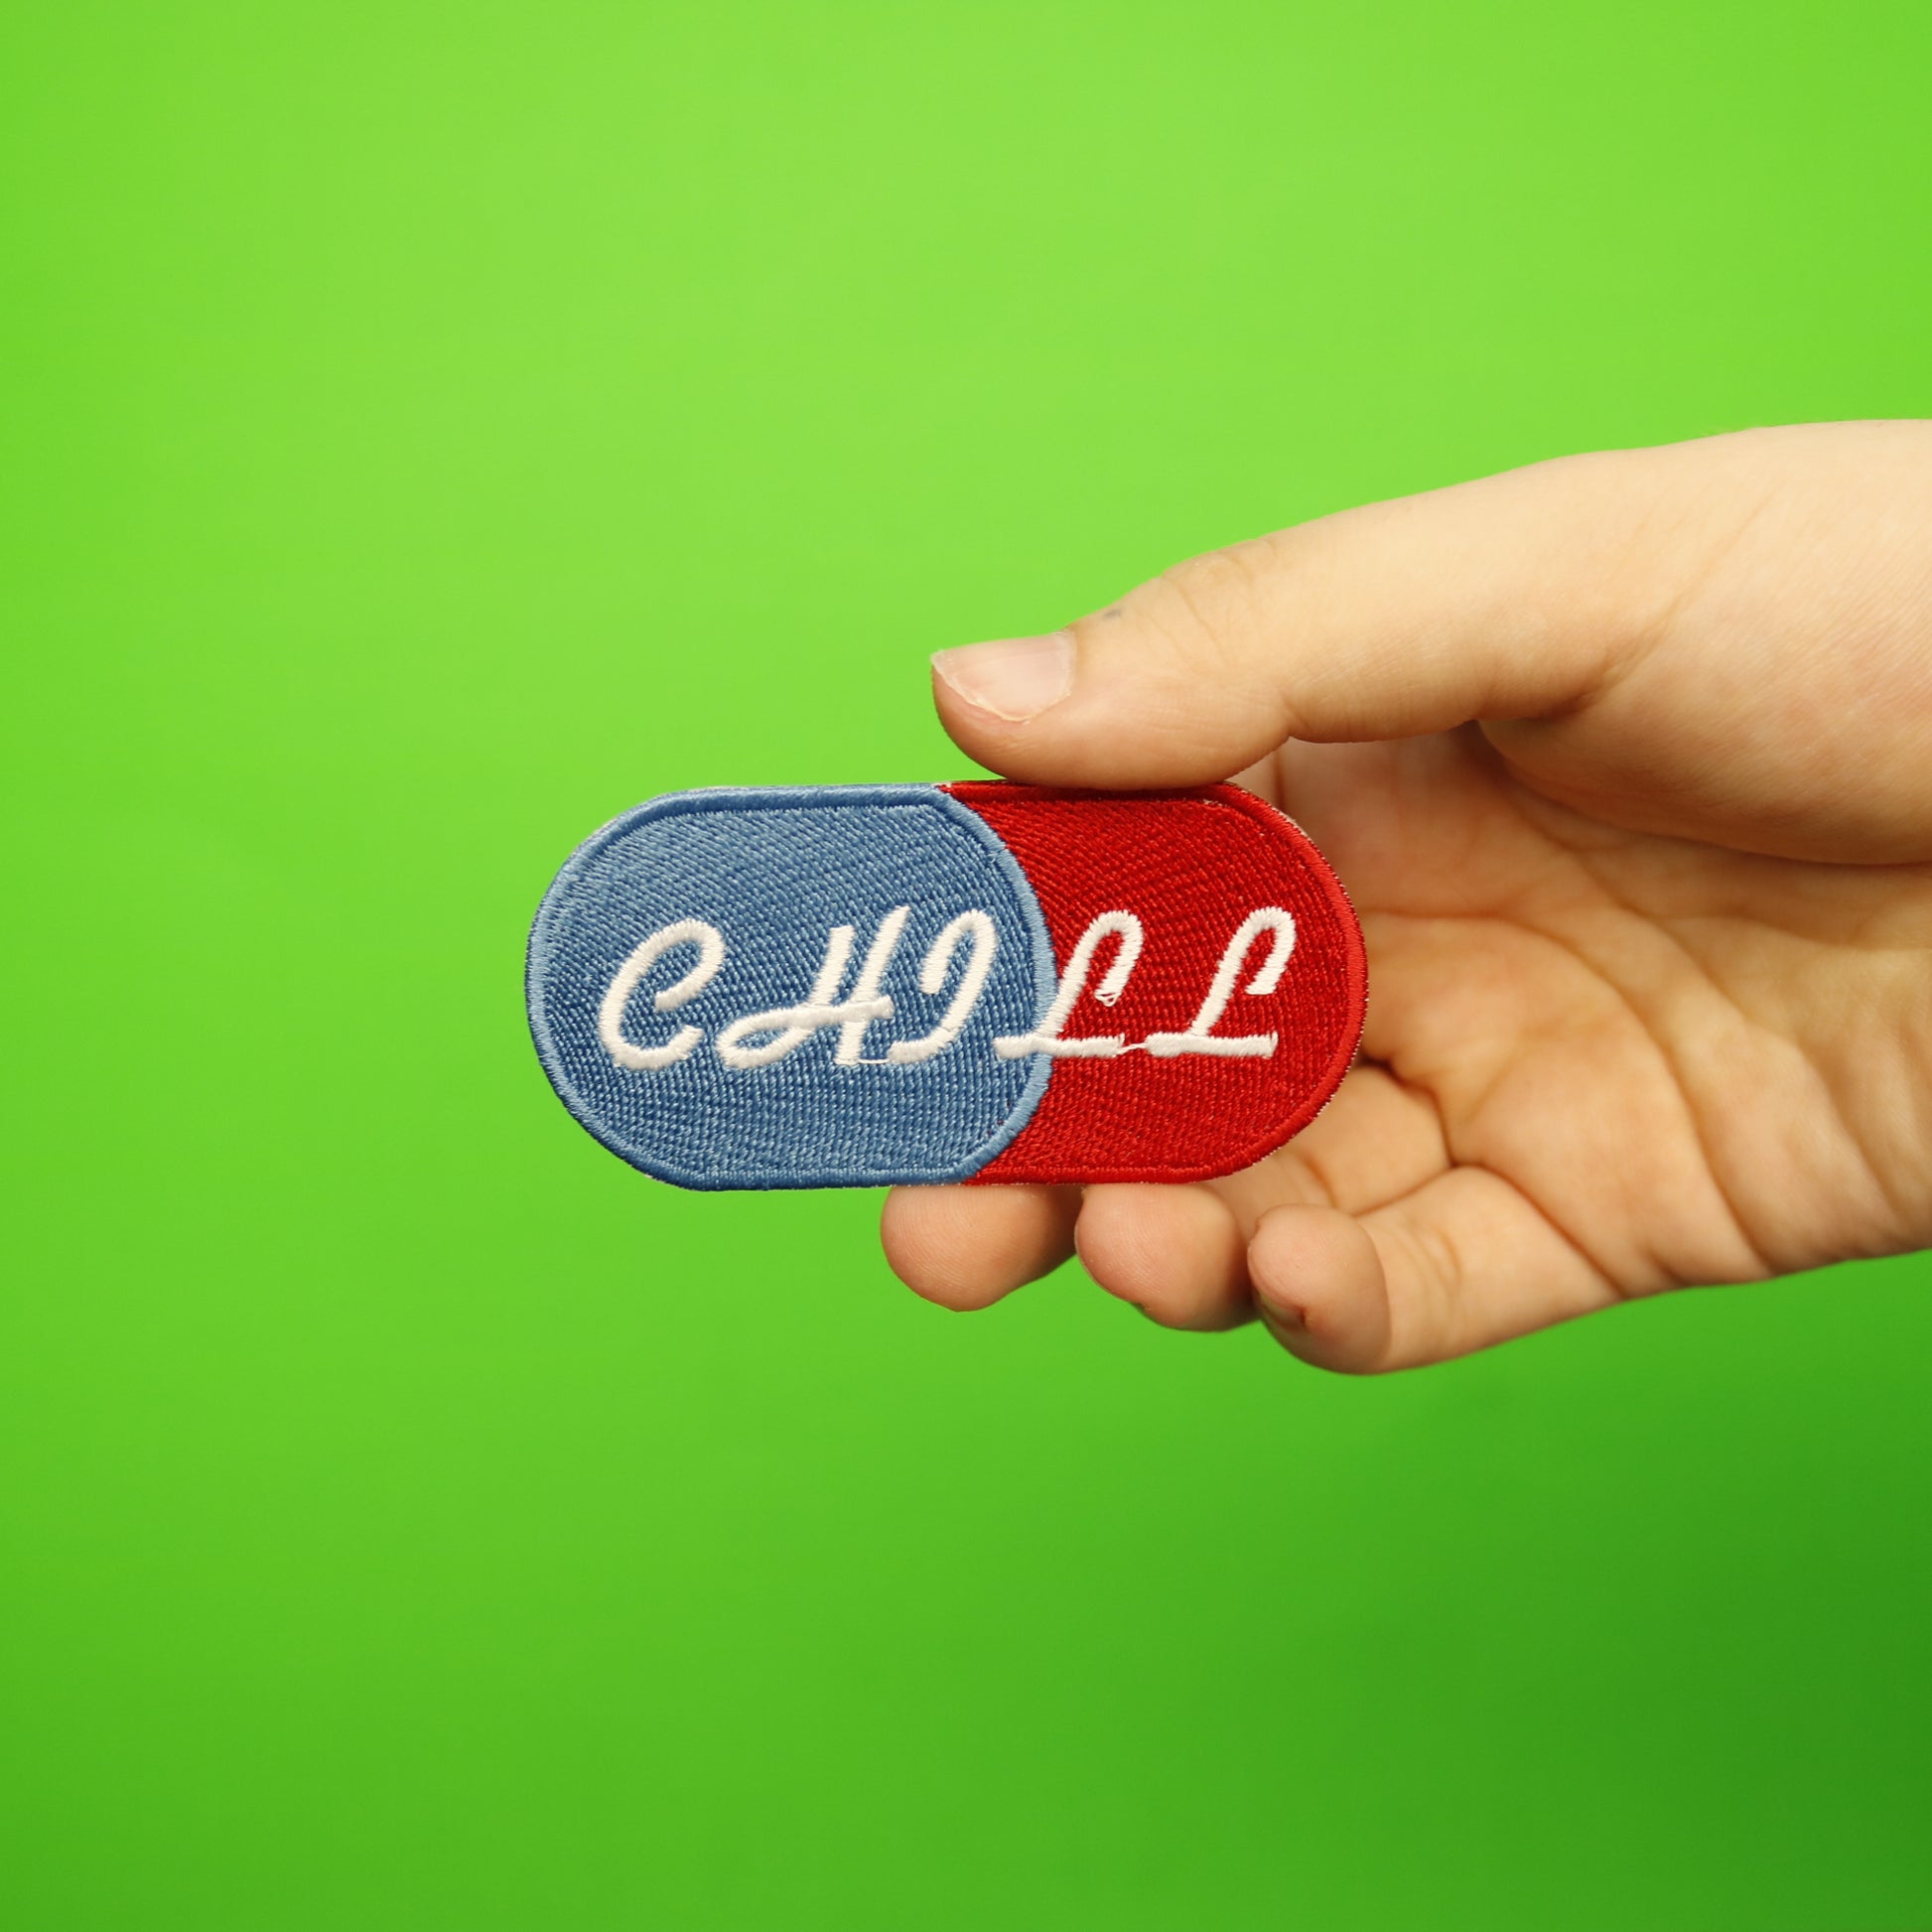 Chill Pill Embroidered Iron On Patch 